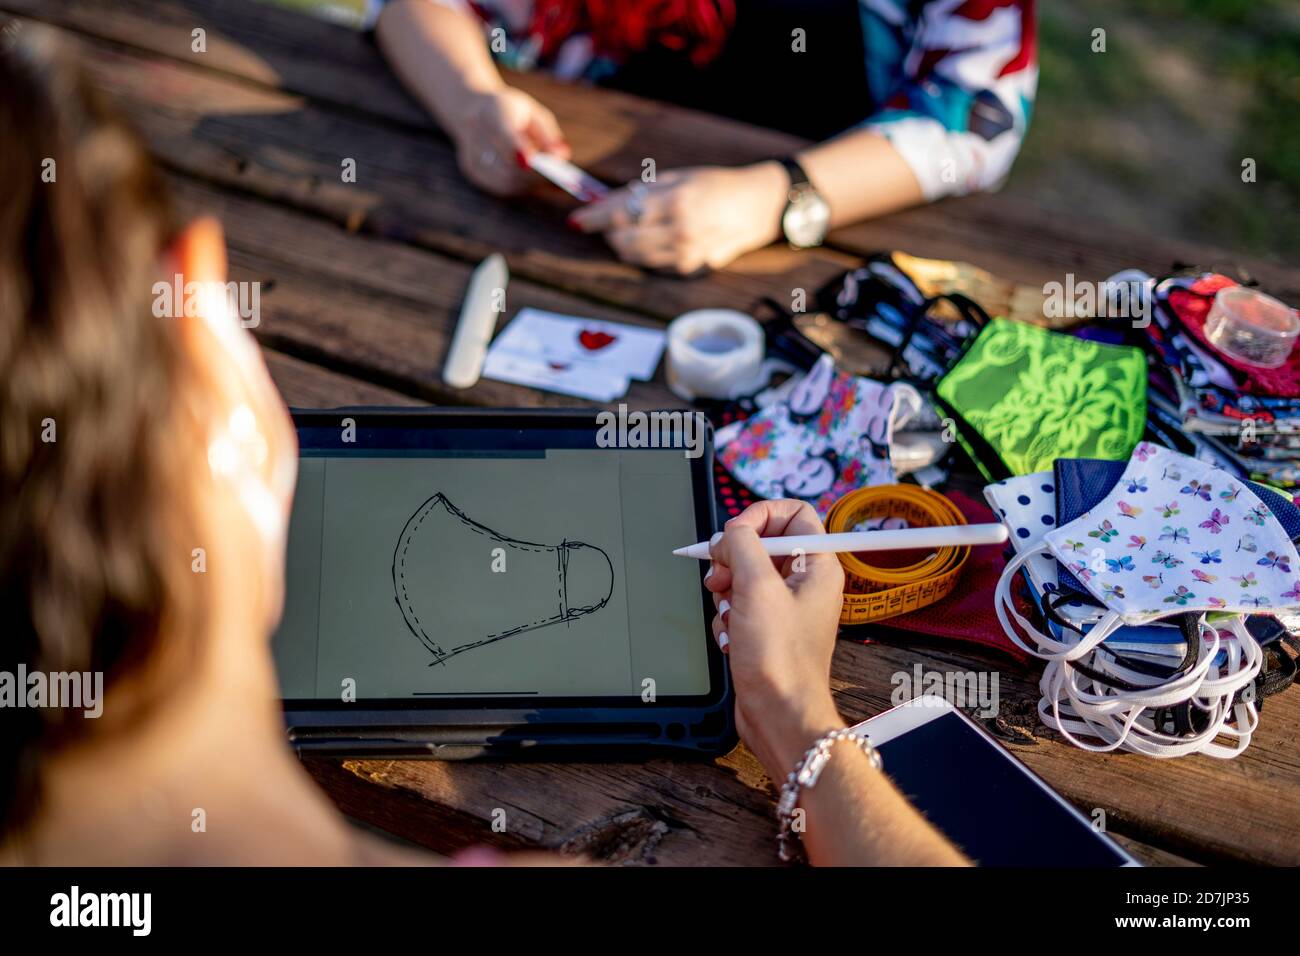 Friends designing face mask on digital tablet while sitting outdoors Stock Photo